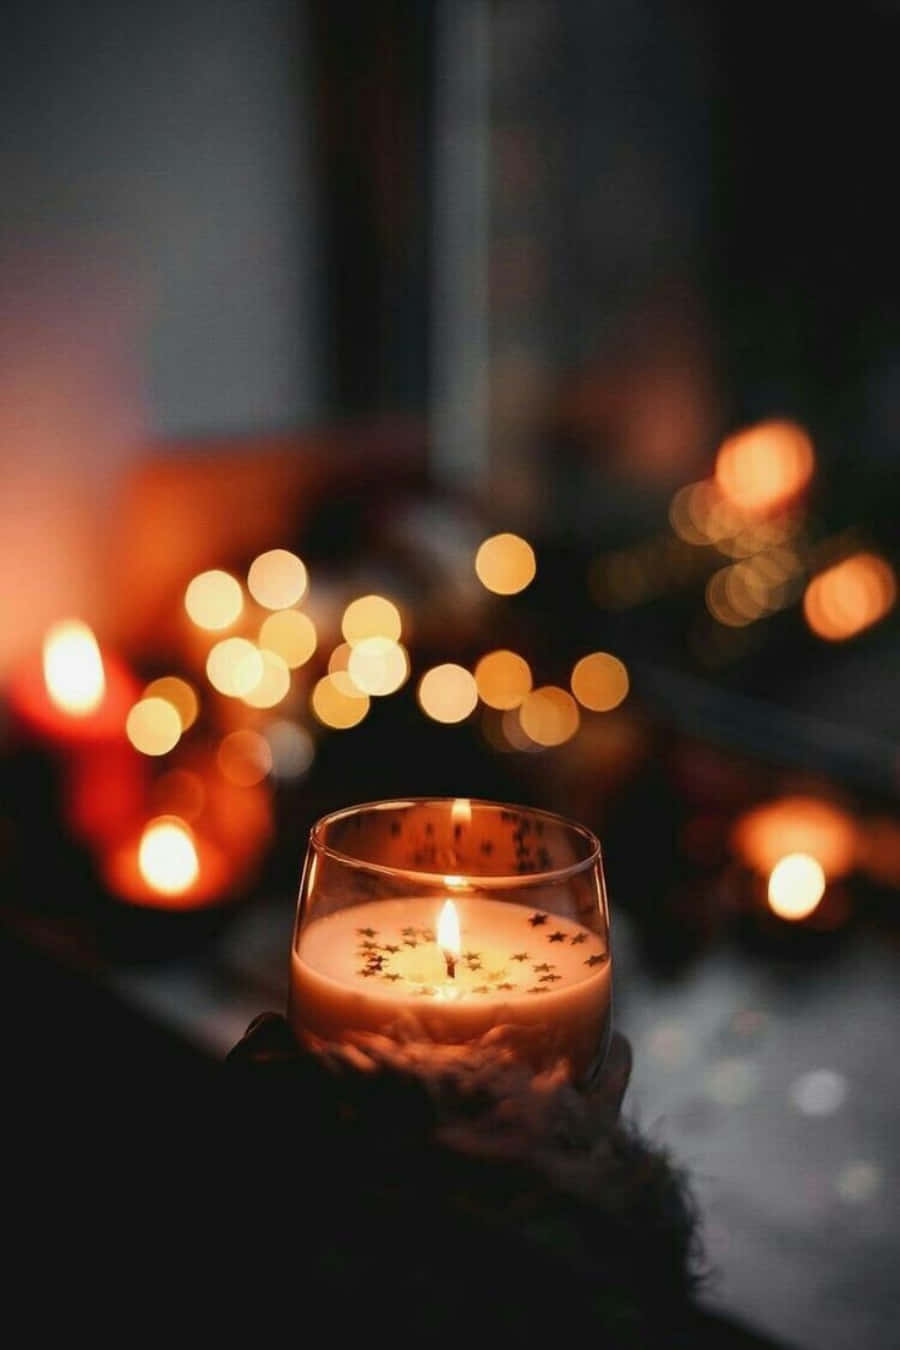 A warm embrace of candle light